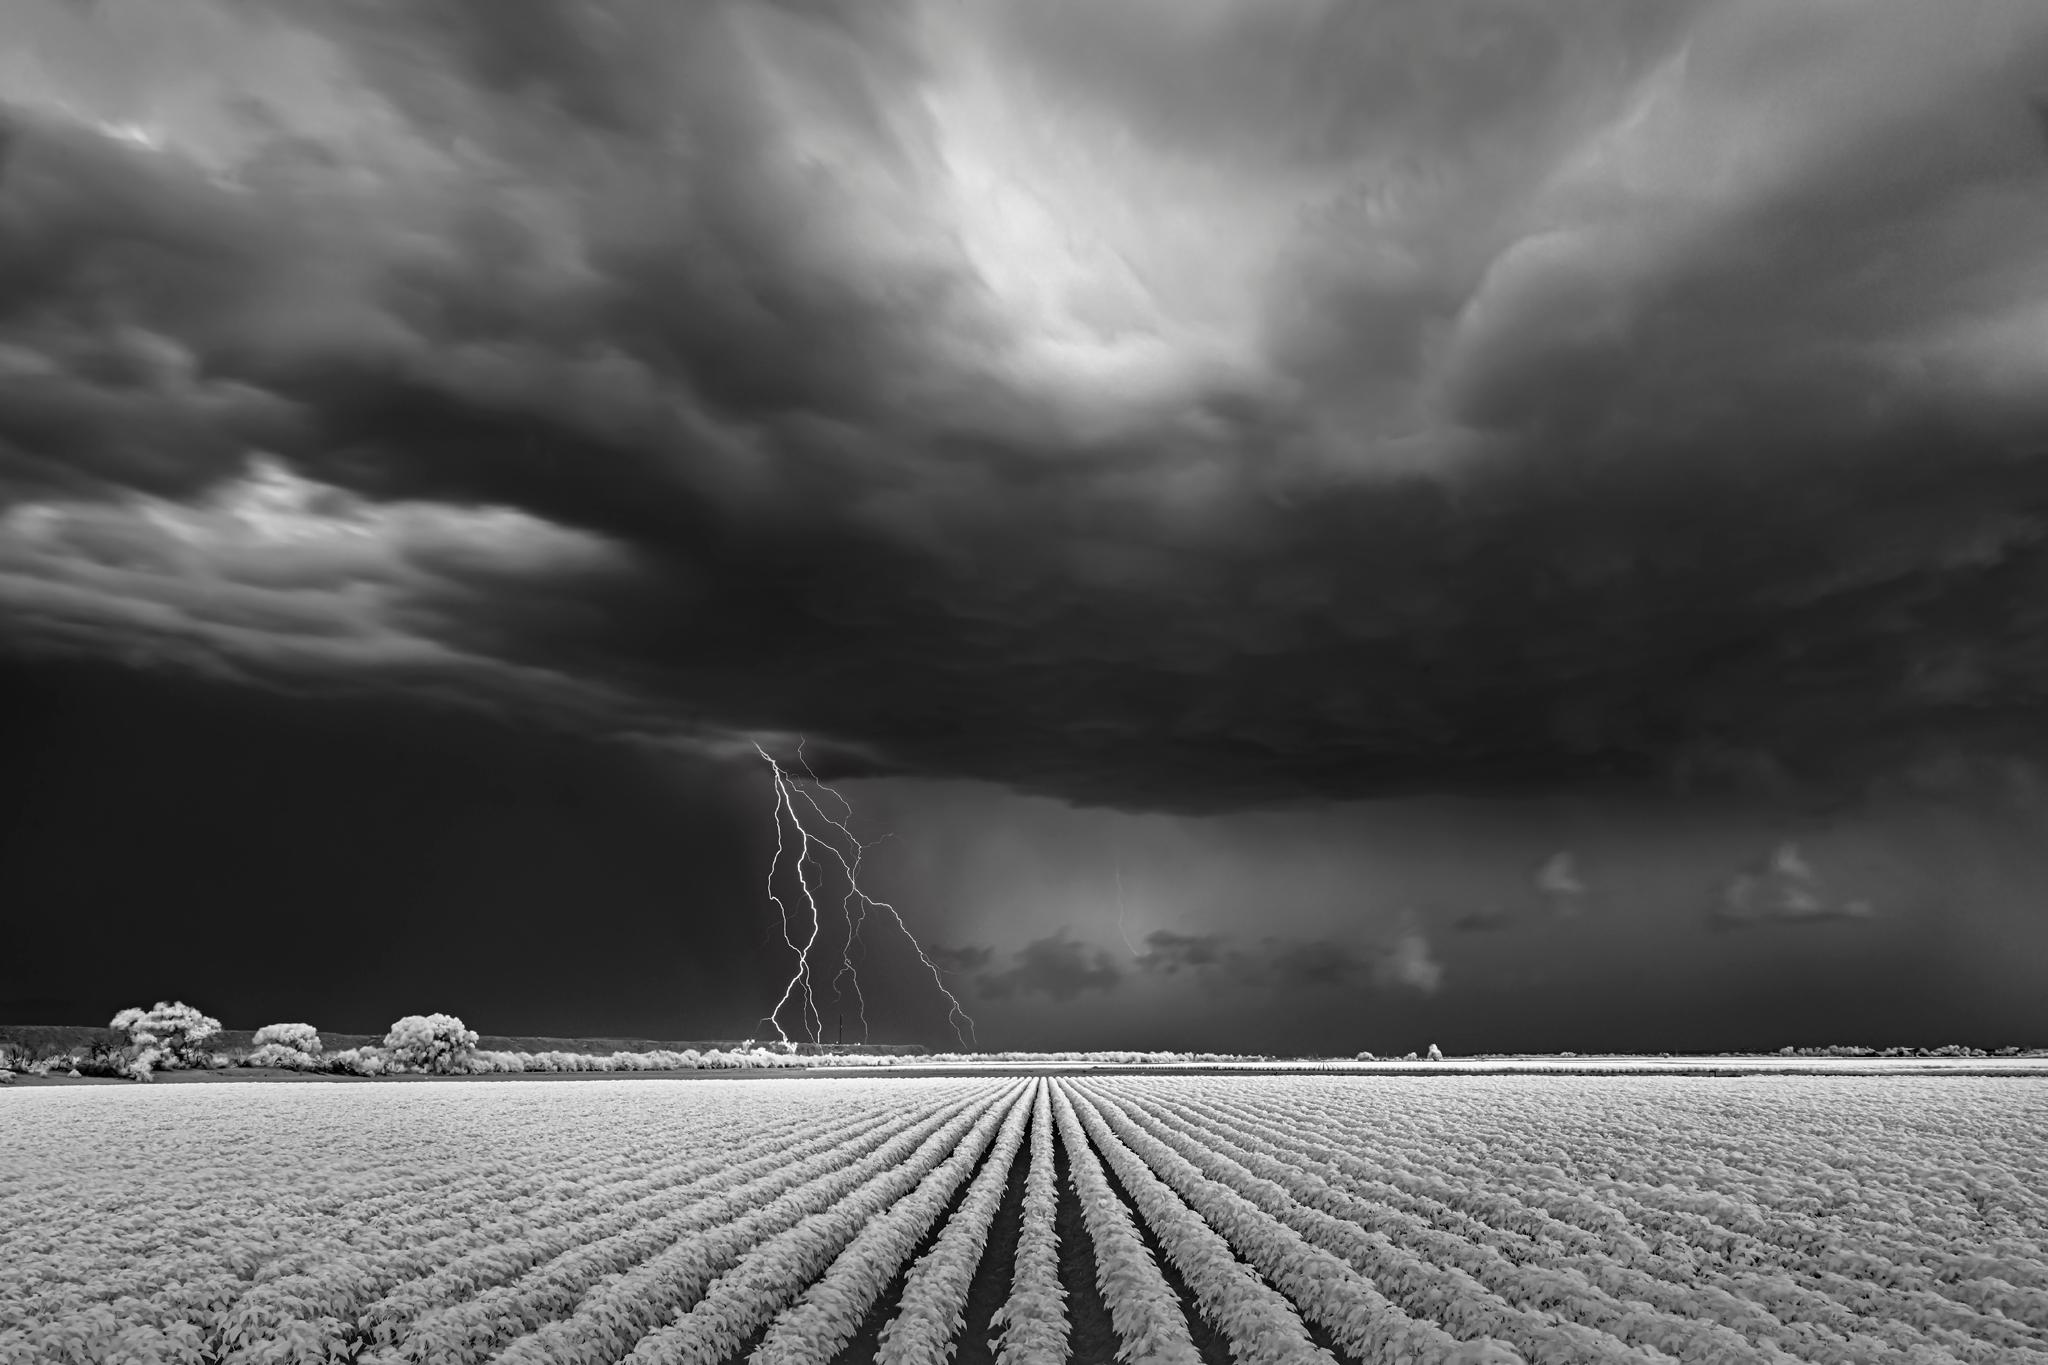 Mitch Dobrowner Black and White Photograph - Lightning/Cotton Field, limited edition photograph, archival, signed 